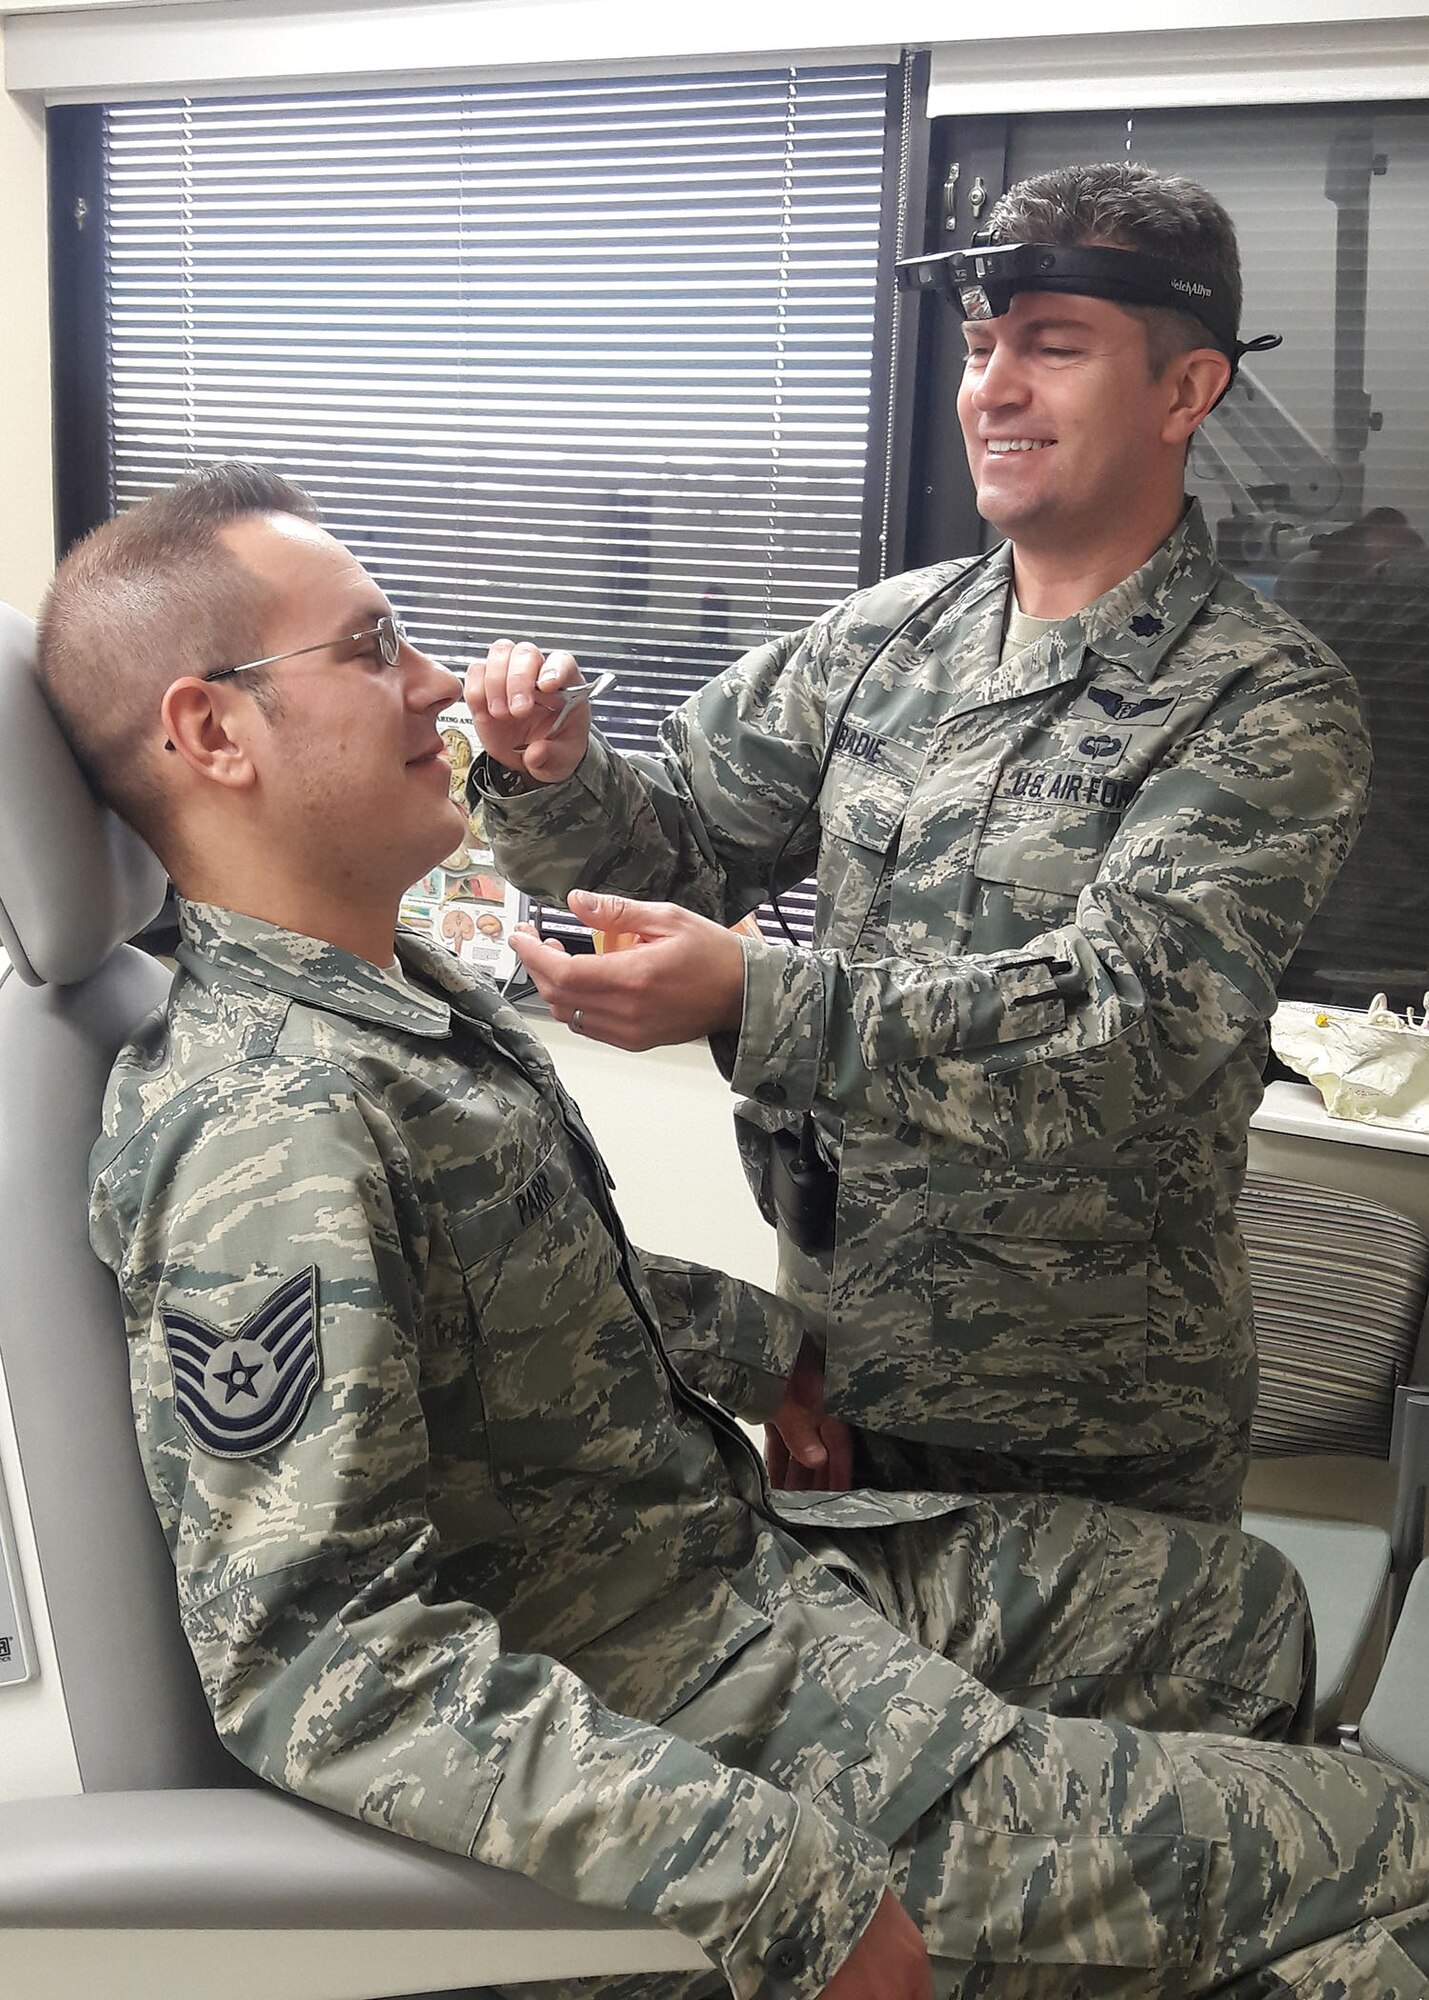 Lt. Col. (Dr.) Wesley Abadie, 99th Medical Group, otolaryngologist, Nellis Air Force Base, Nev.  Dr. Abadie has performed more than 700 operations at Mike O’Callaghan Military Medical Center. (Courtesy photo) 